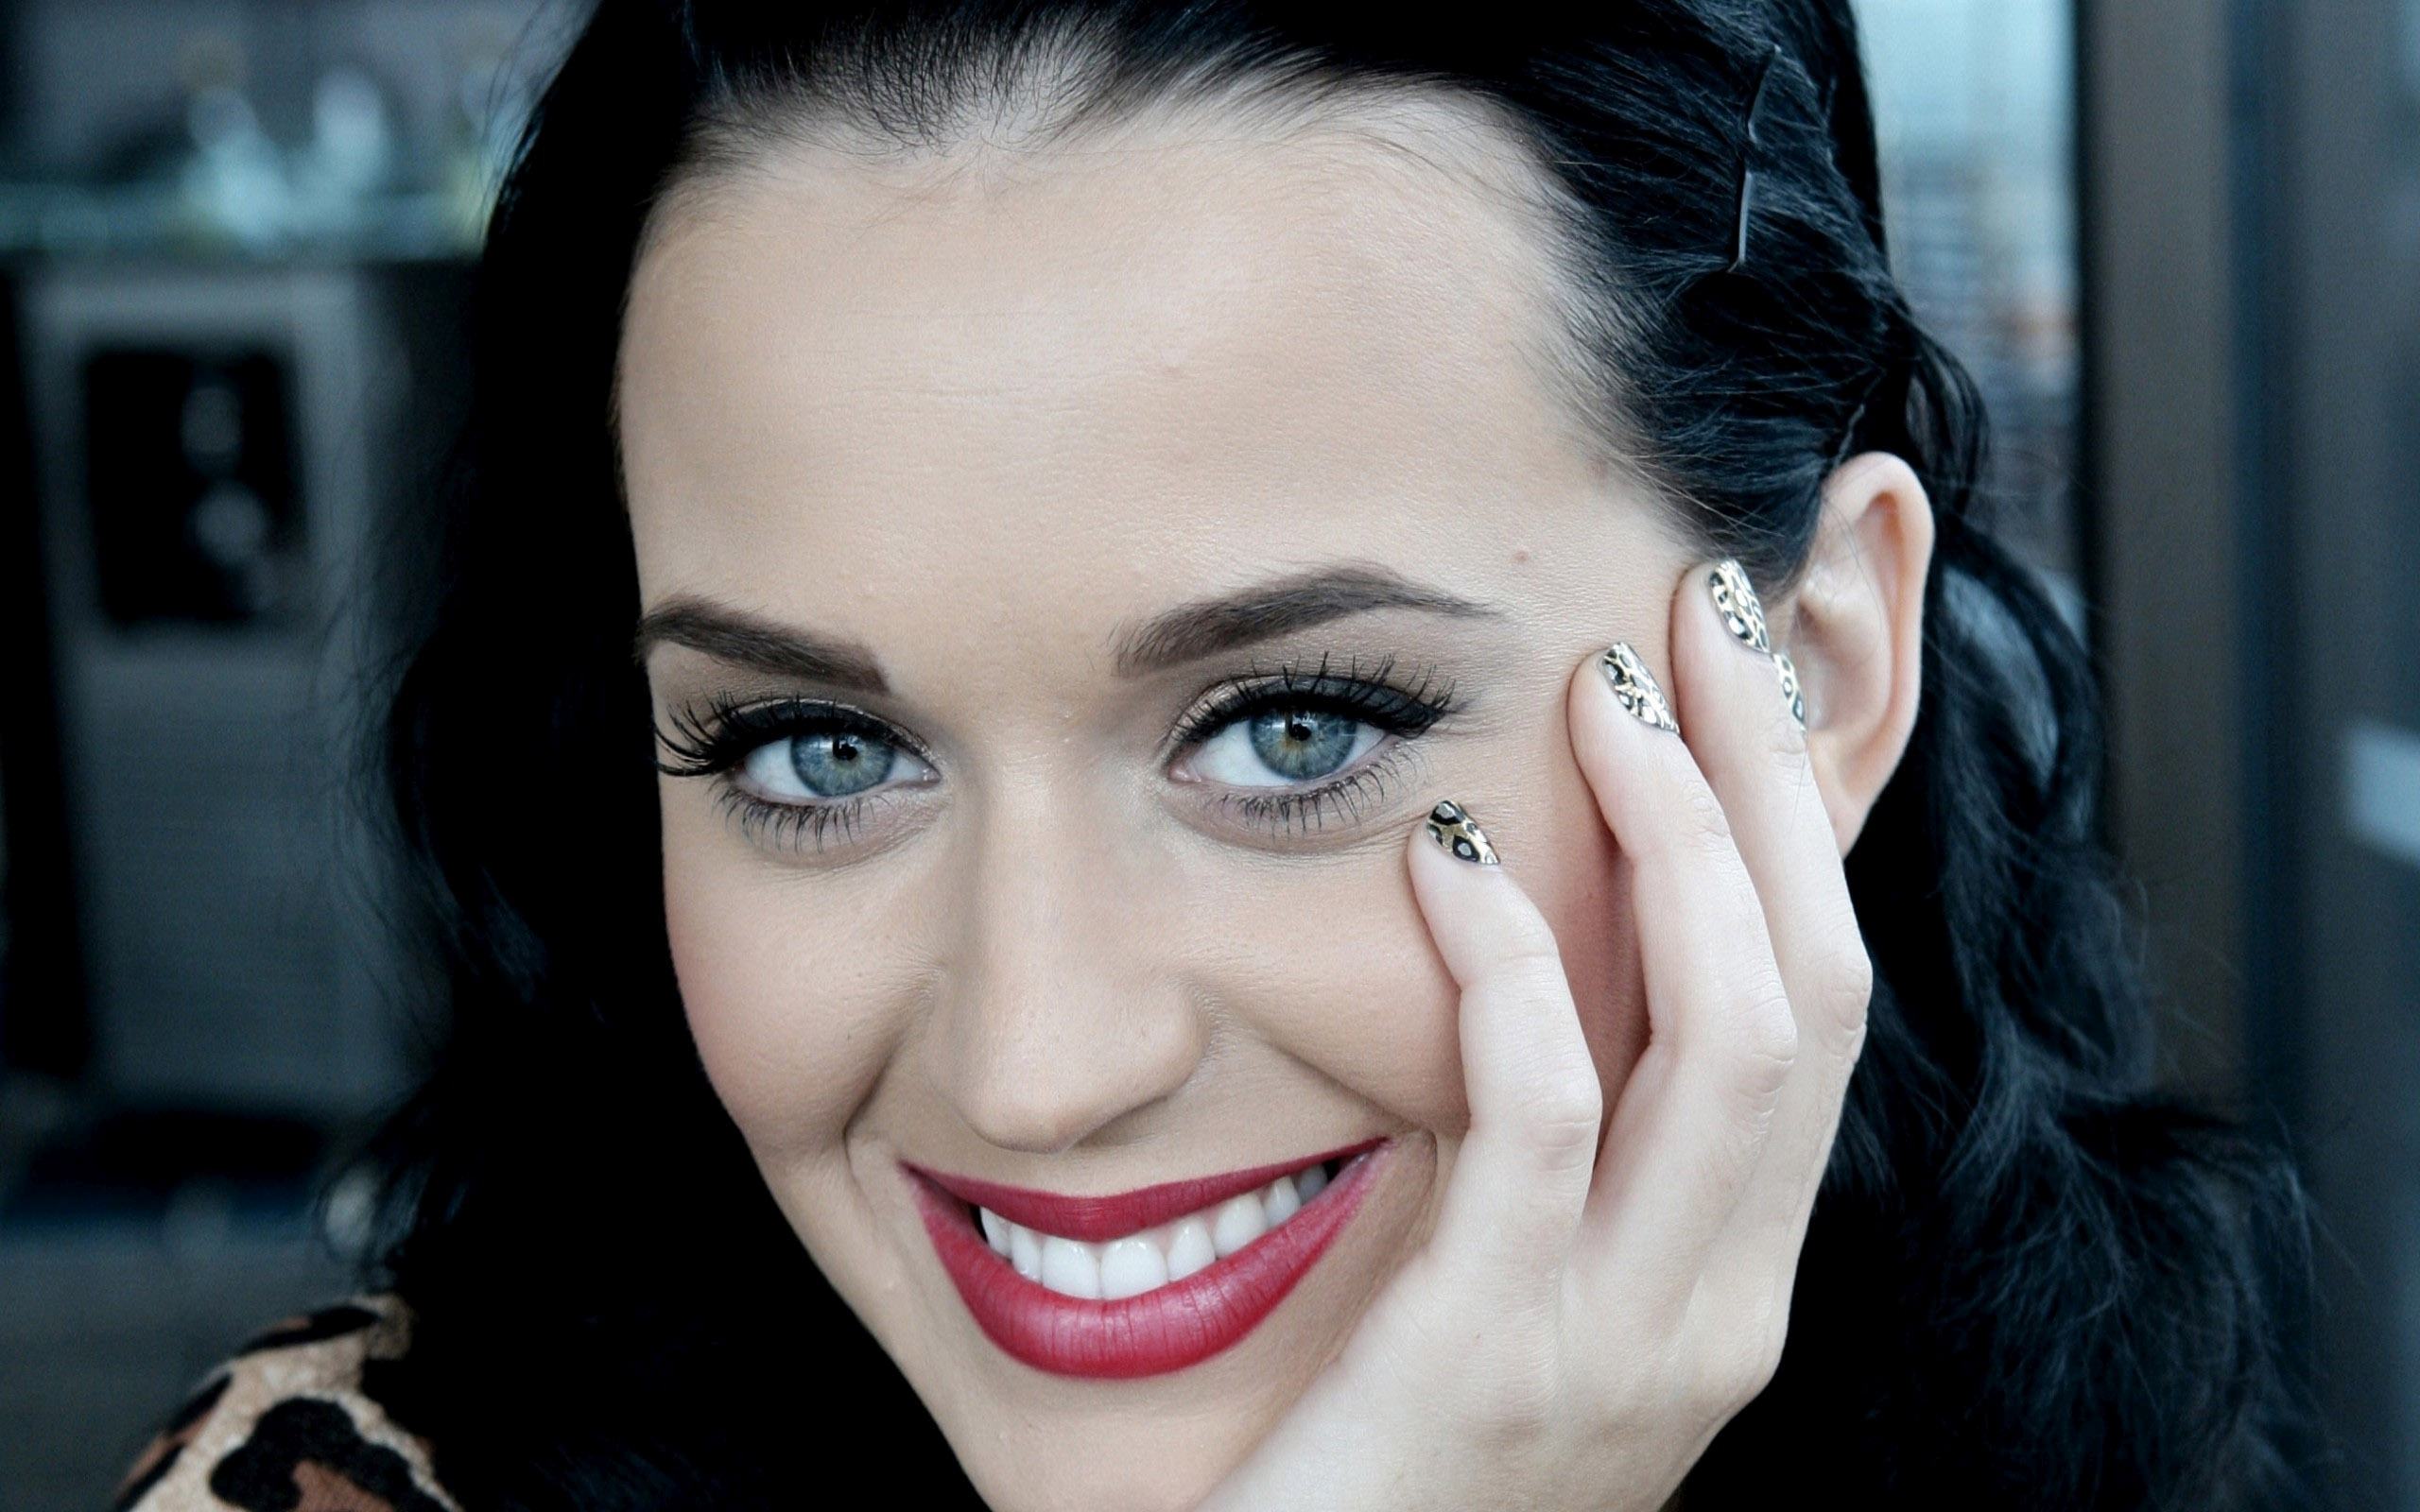 Katy Perry Is Smiling - HD Wallpaper 